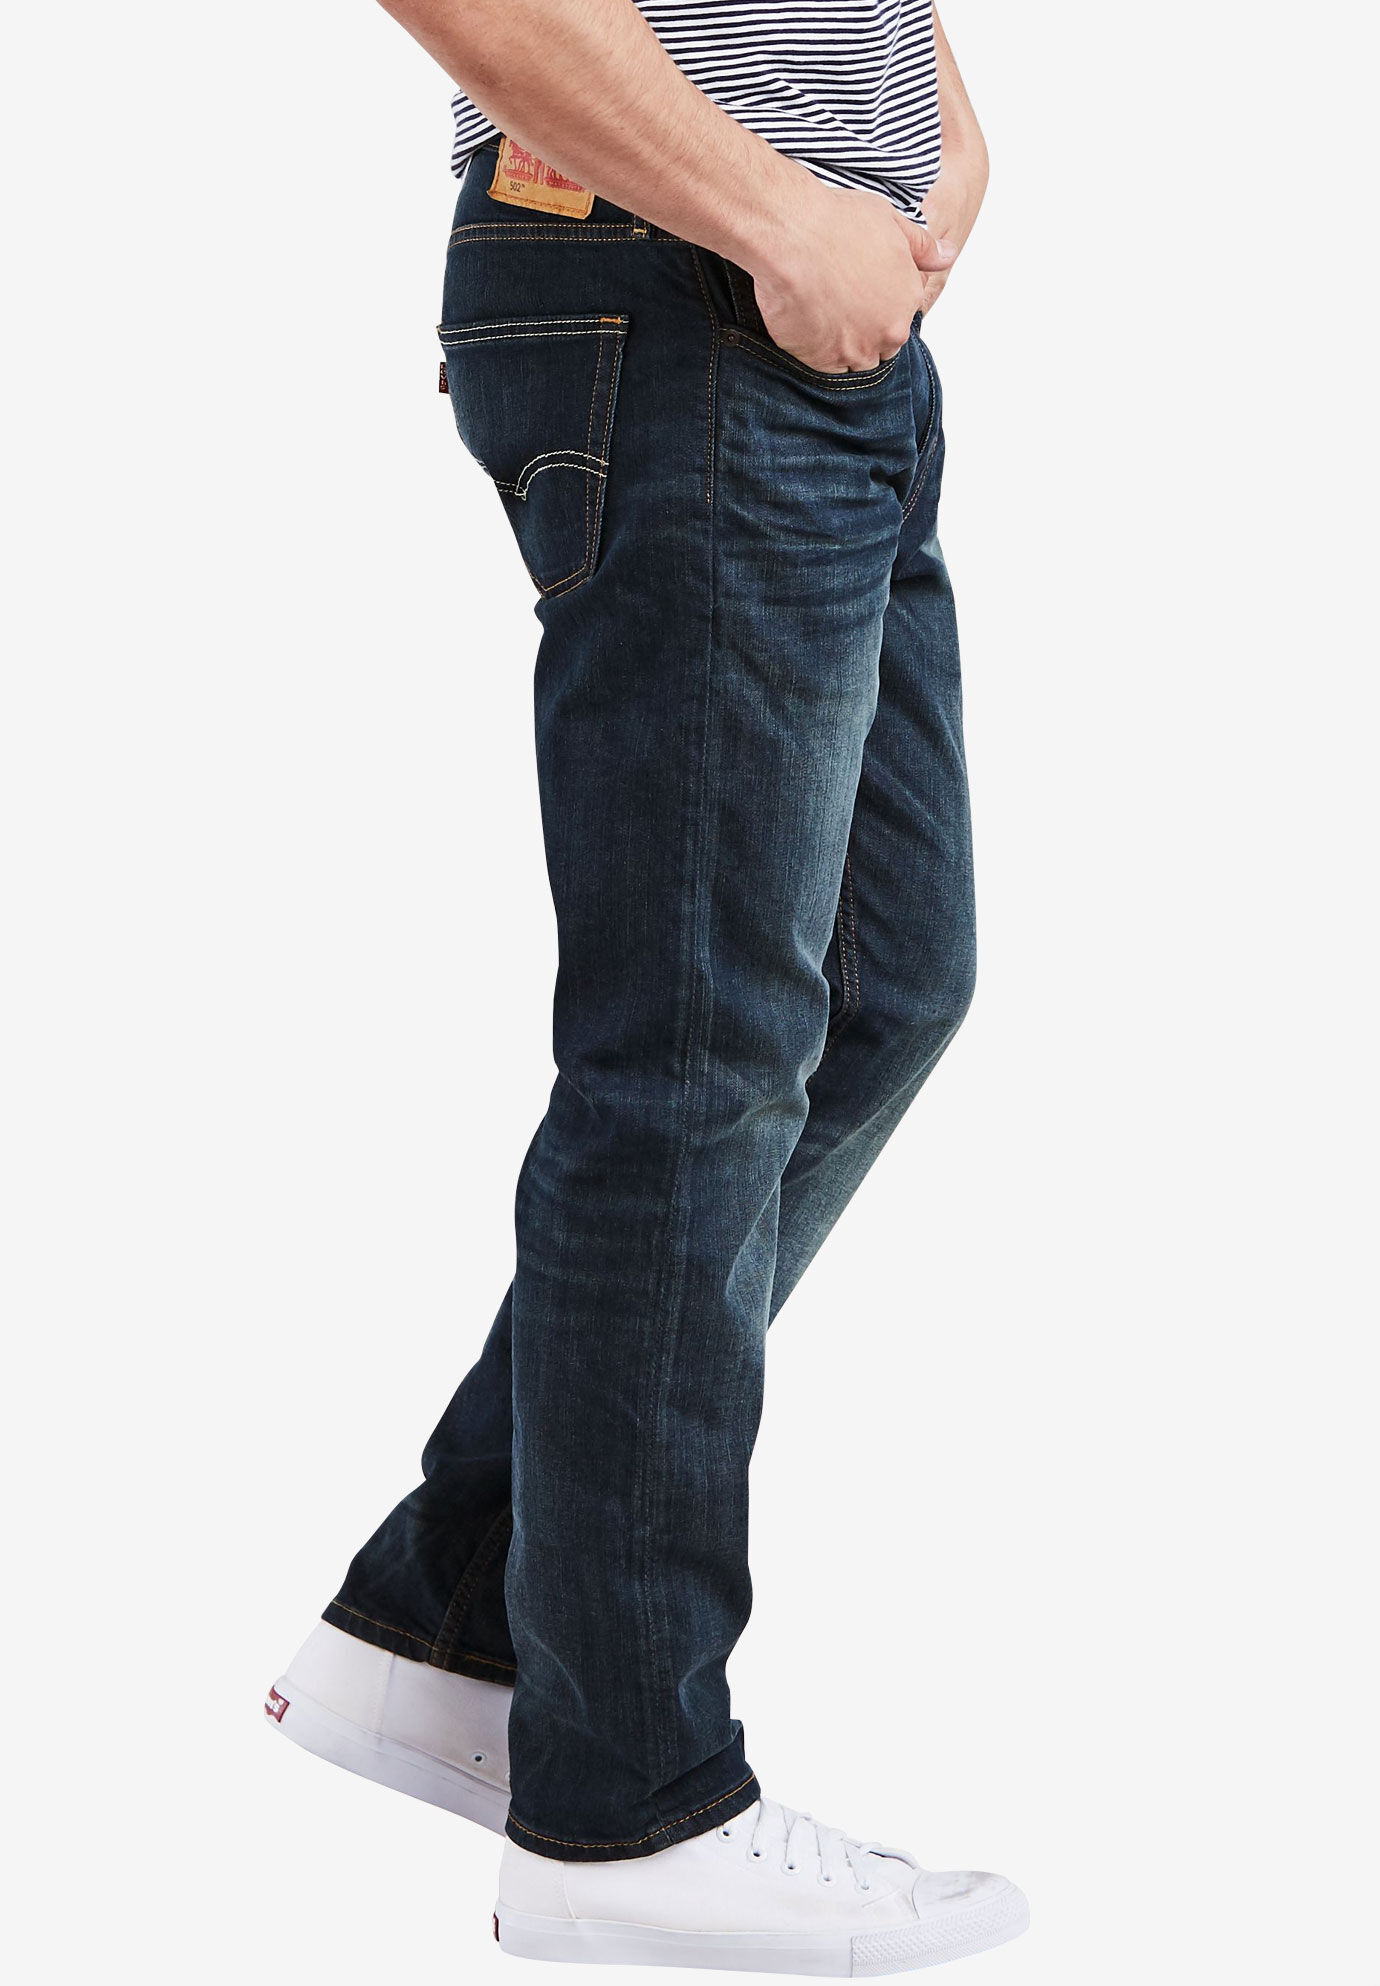 size 46 tapered jeans